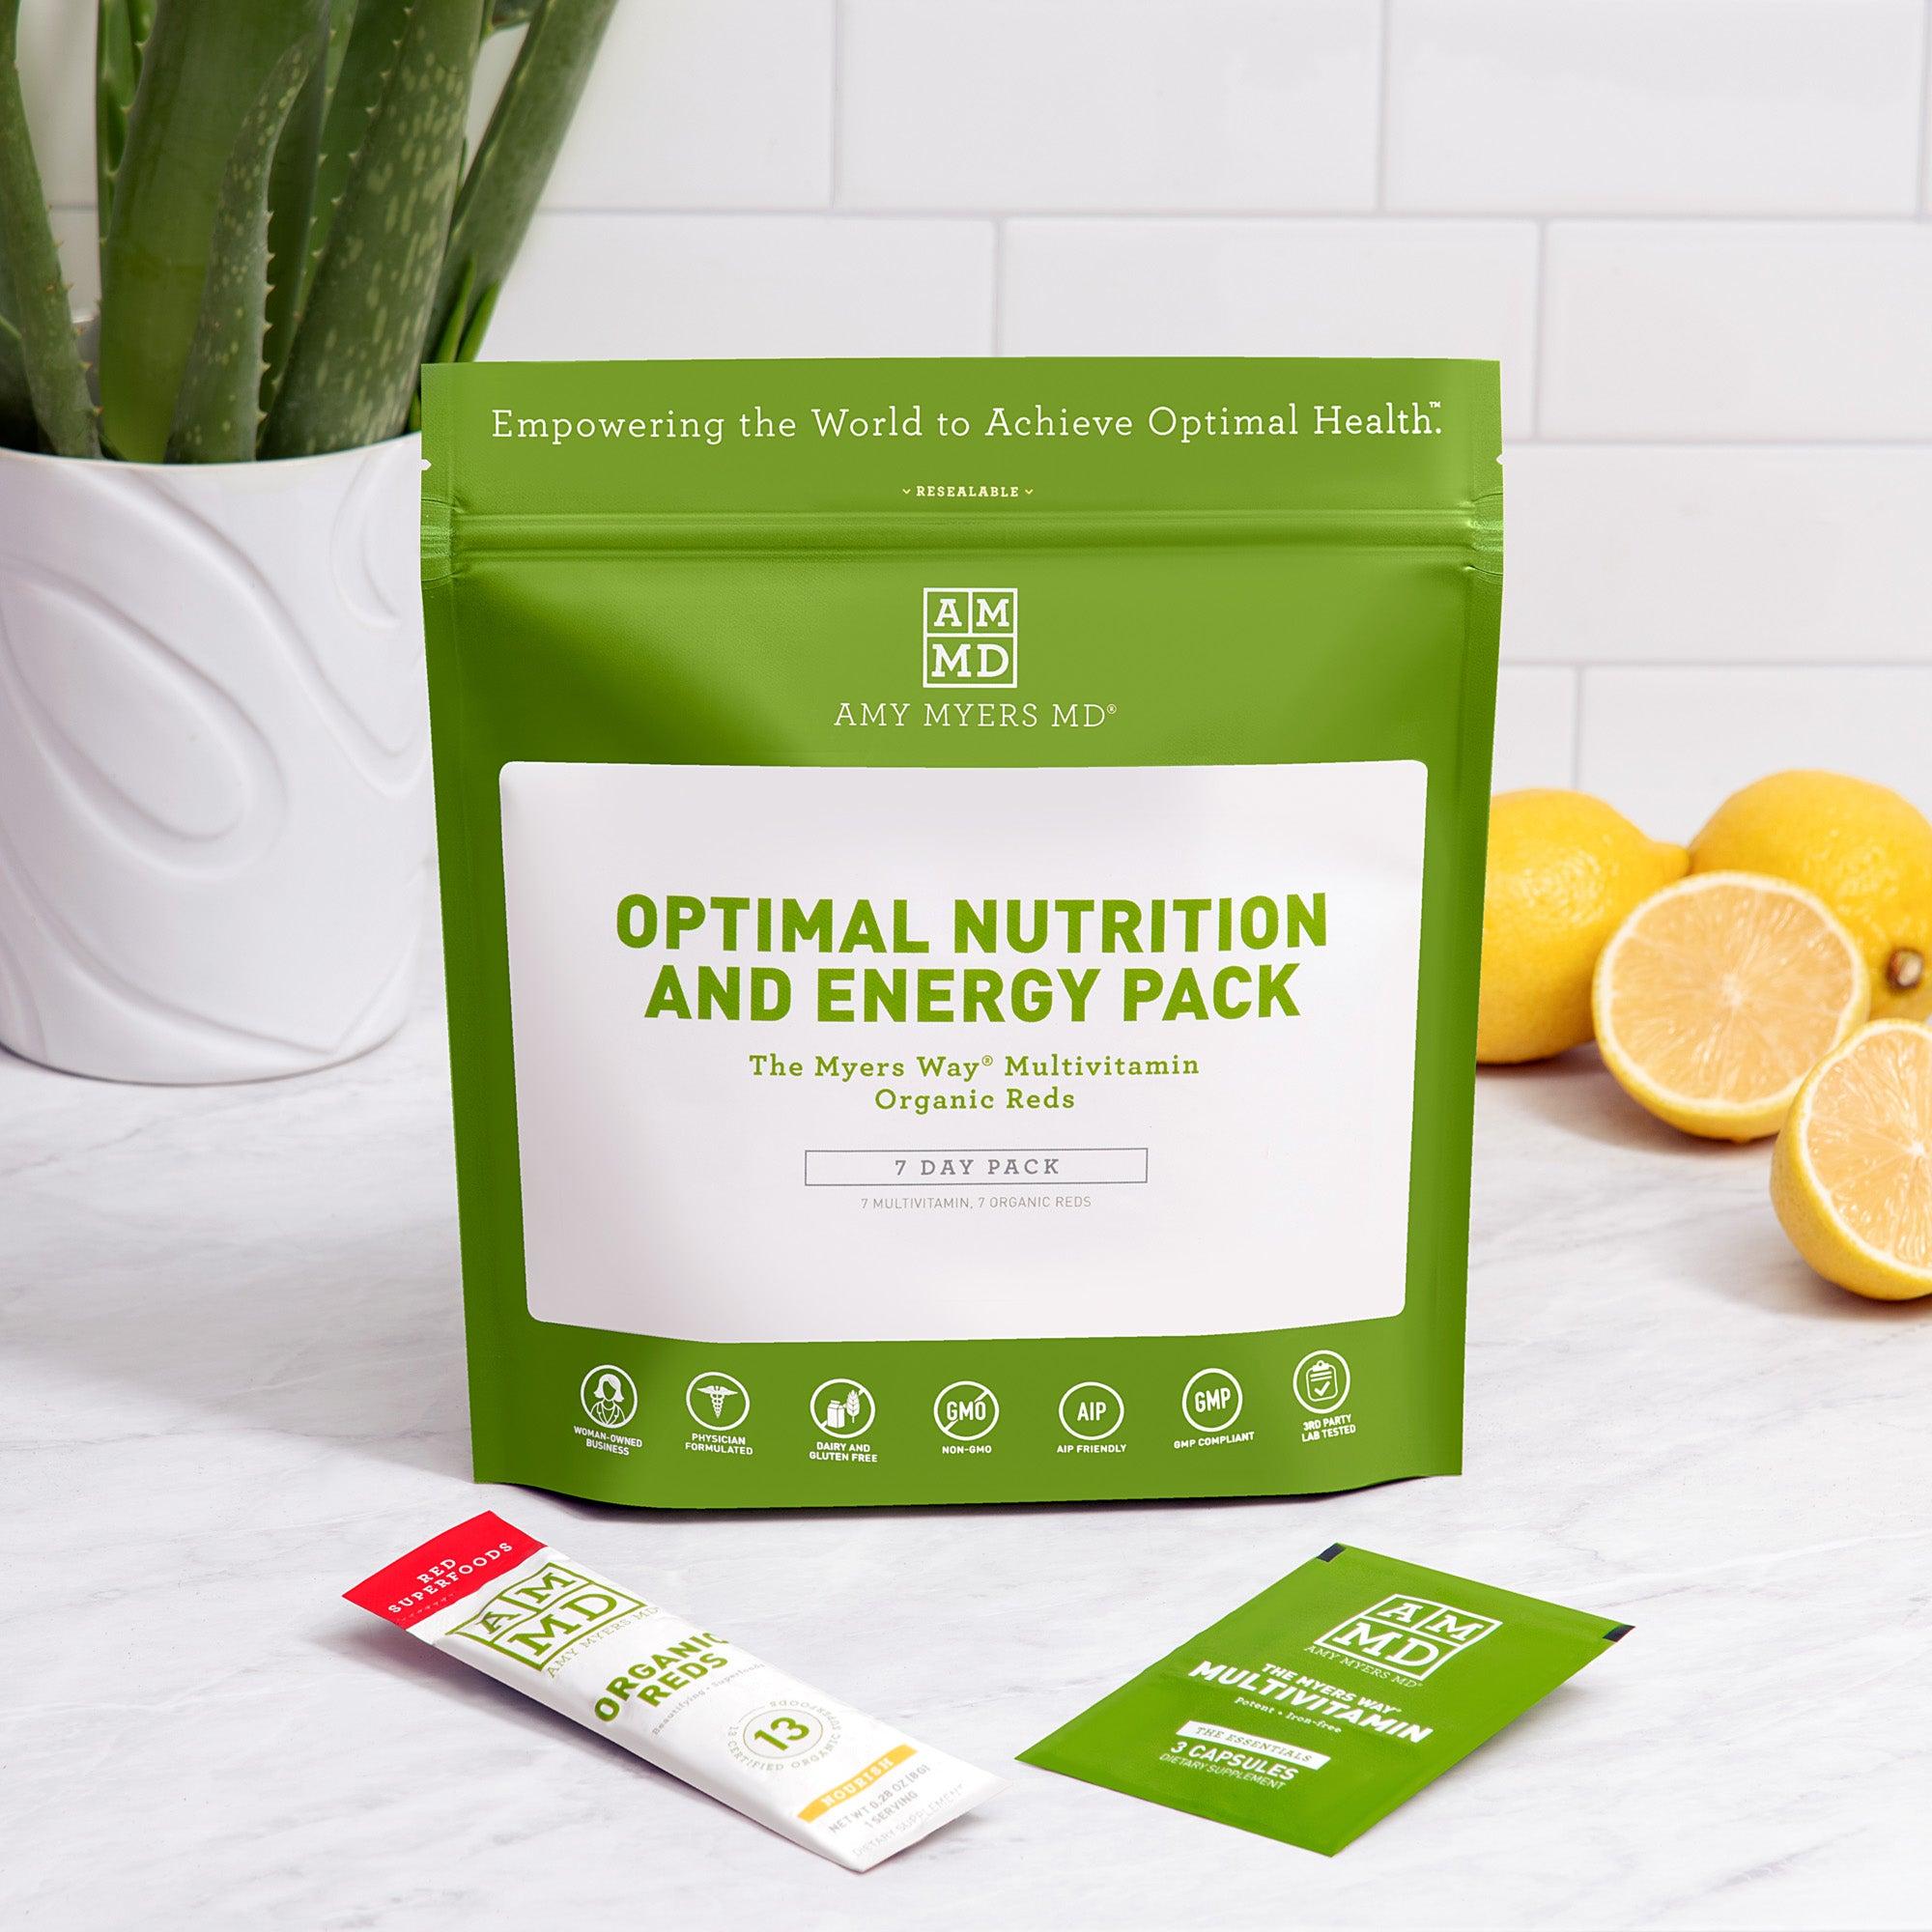 Optimal Nutrition and Energy Pack - Organic Reds, The Myers Way® Multivitamin - Featured Image - Amy Myers MD